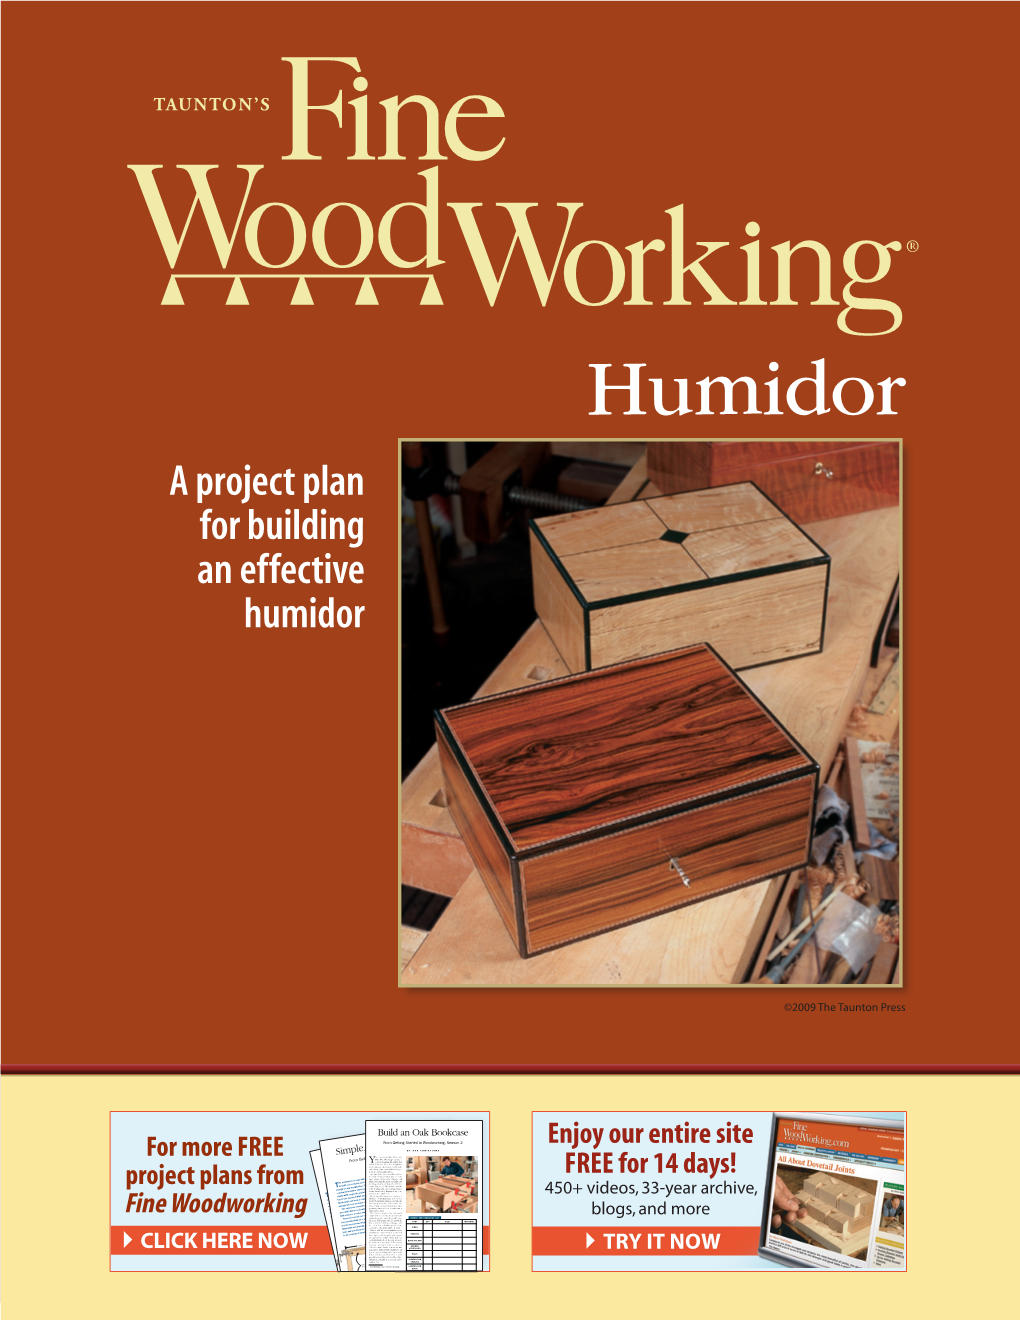 Humidor a Project Plan for Building an Effective Humidor